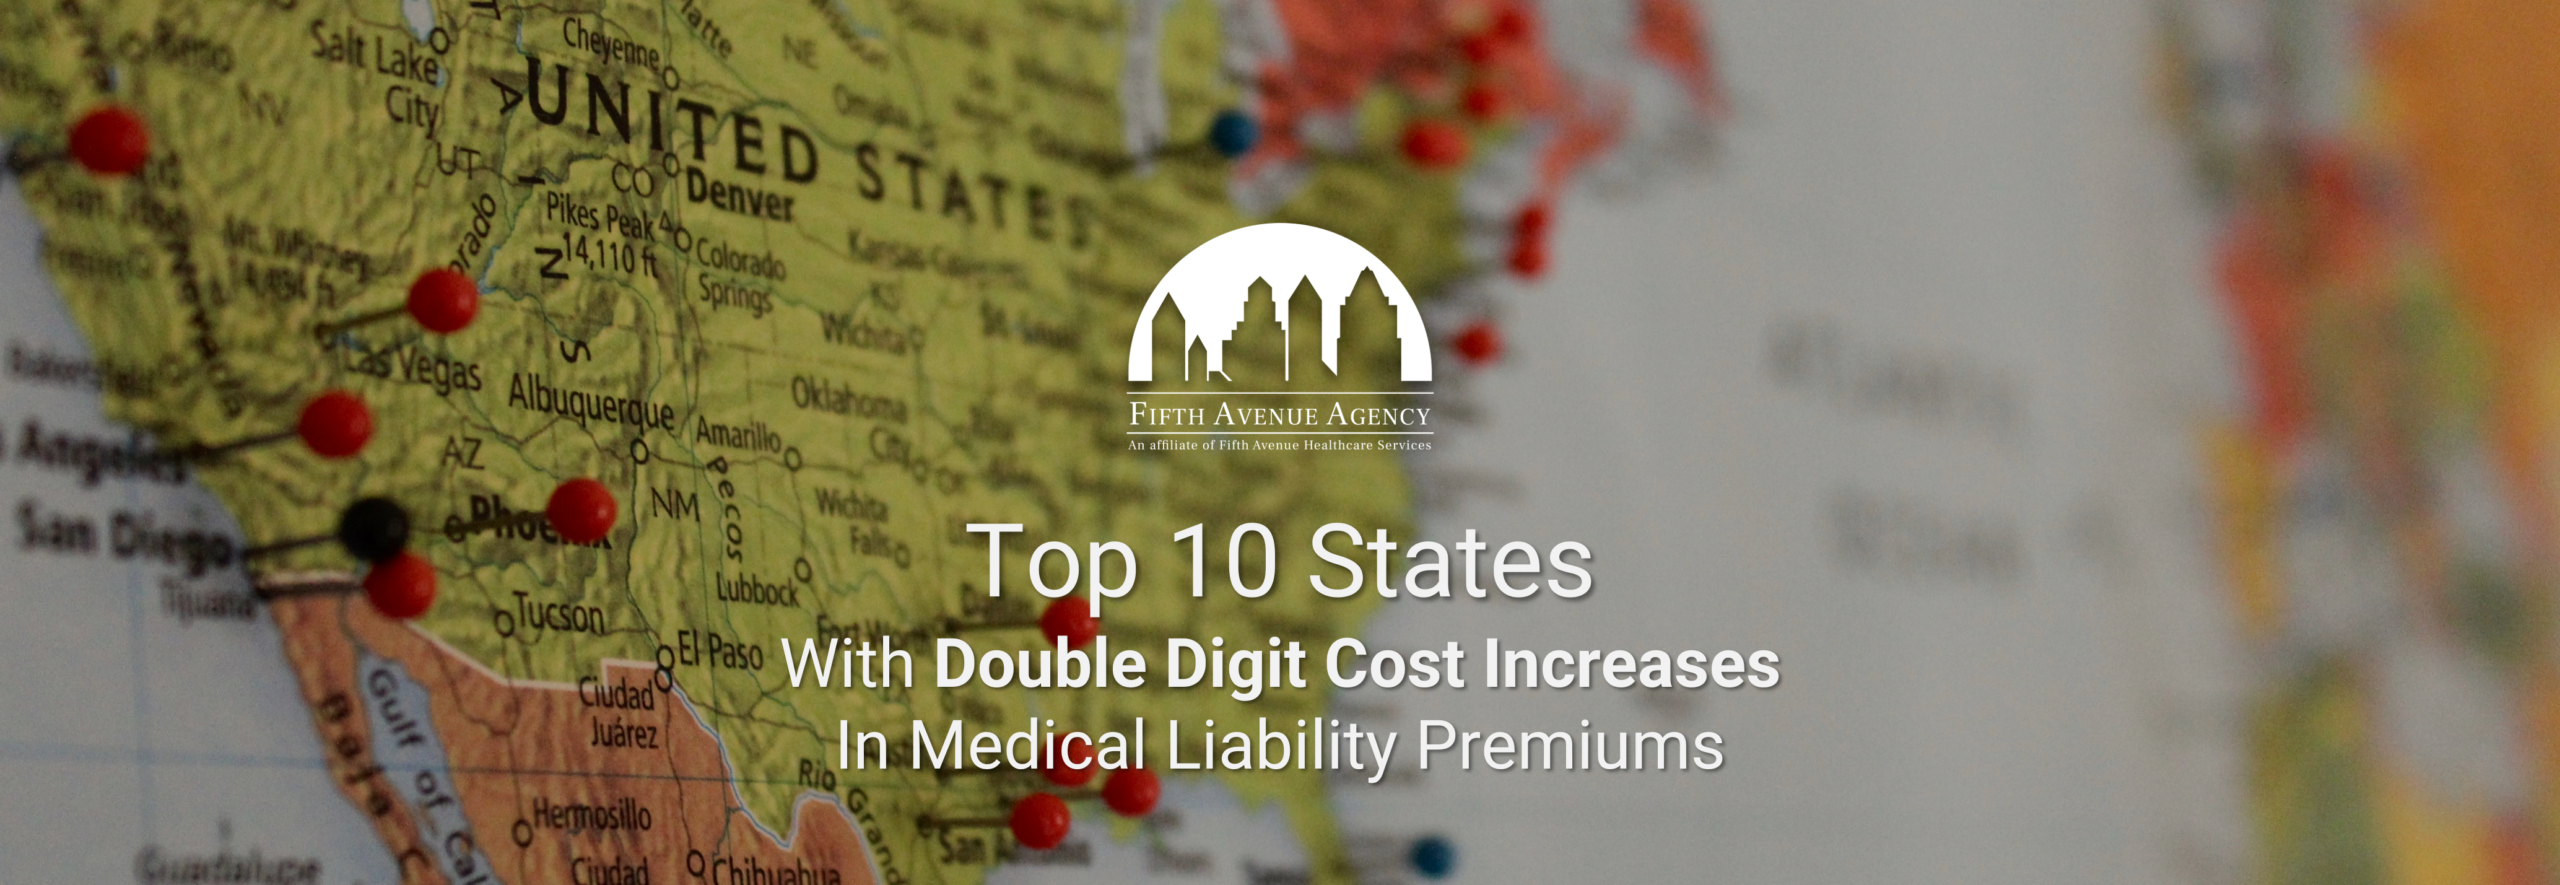 Top 10 States With Double Digit Cost Increases In Medical Liability Premiums